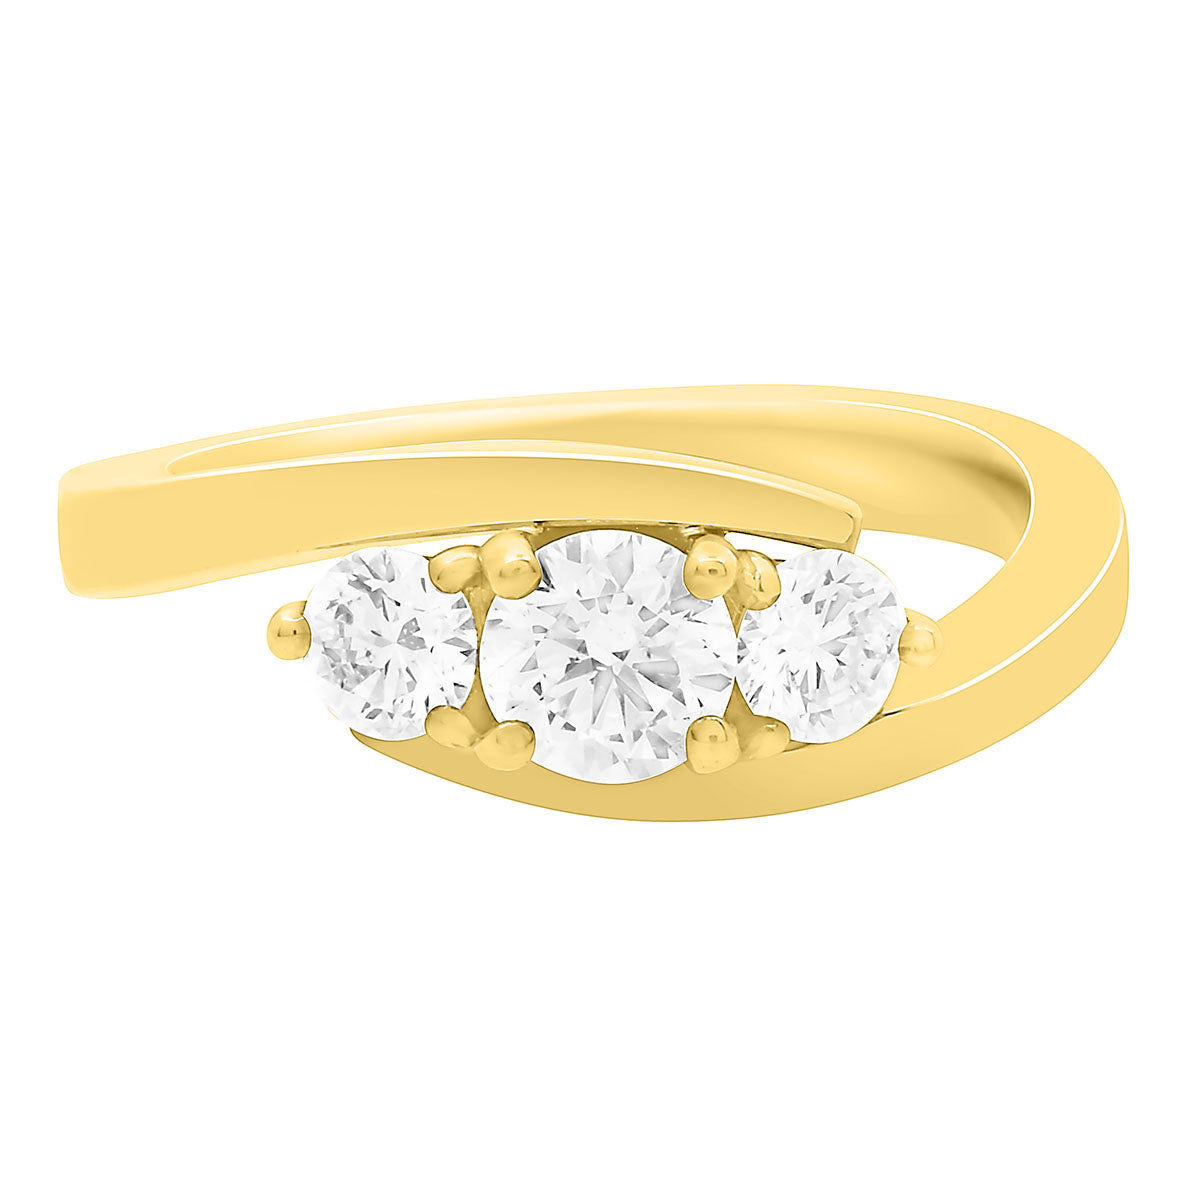 Contemporary Style Diamond Ring in yellow gold